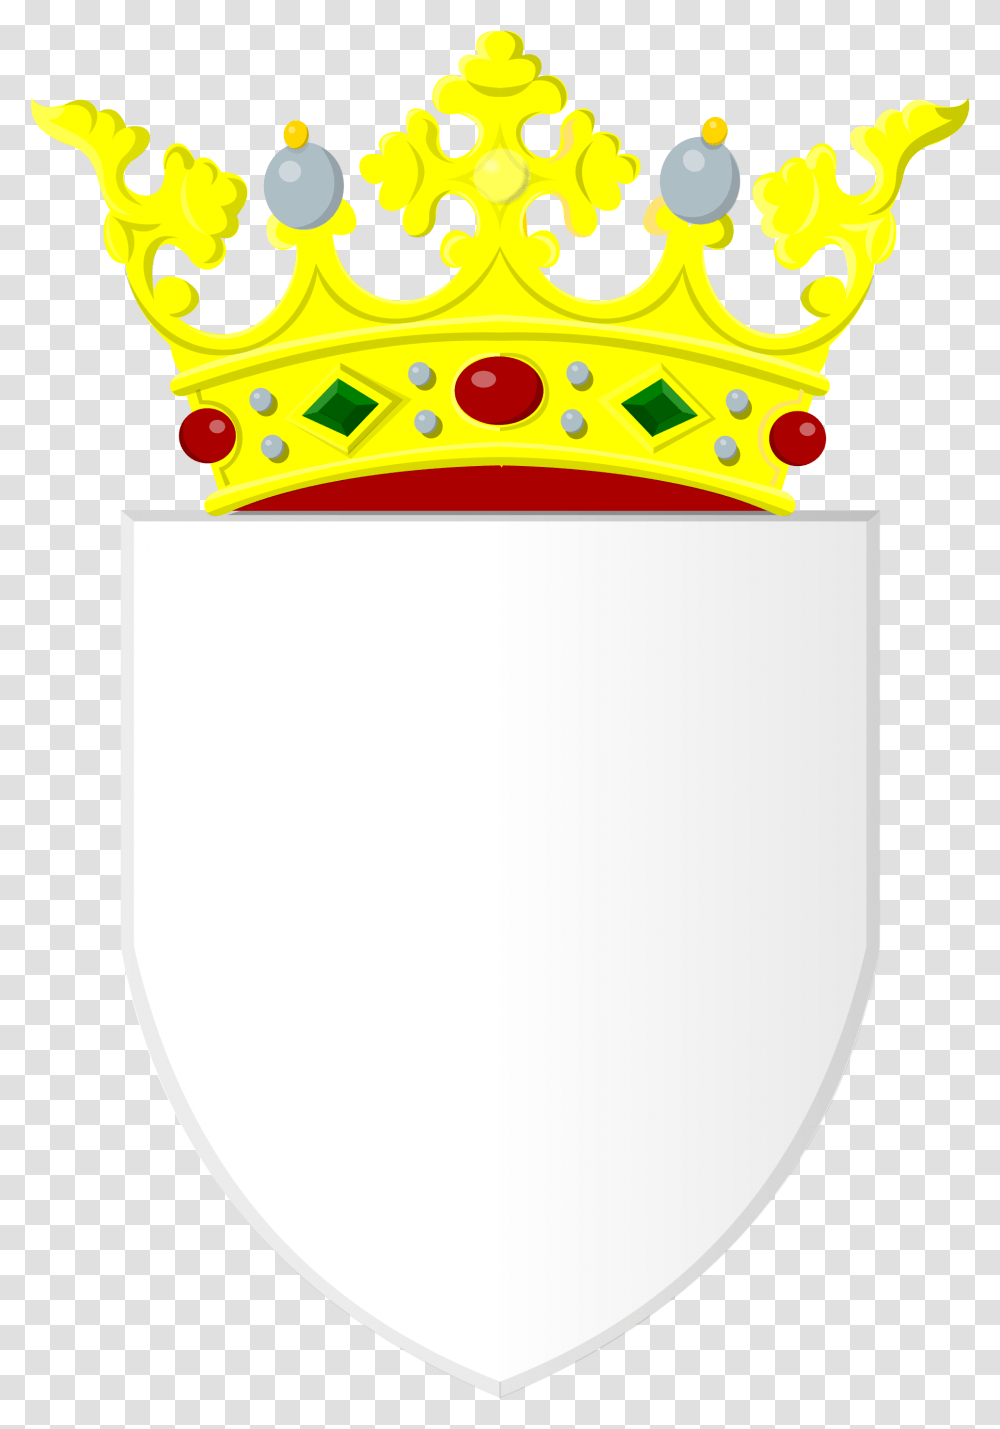 Silver Shield With Golden Crown, Jewelry, Accessories, Accessory, Lamp Transparent Png